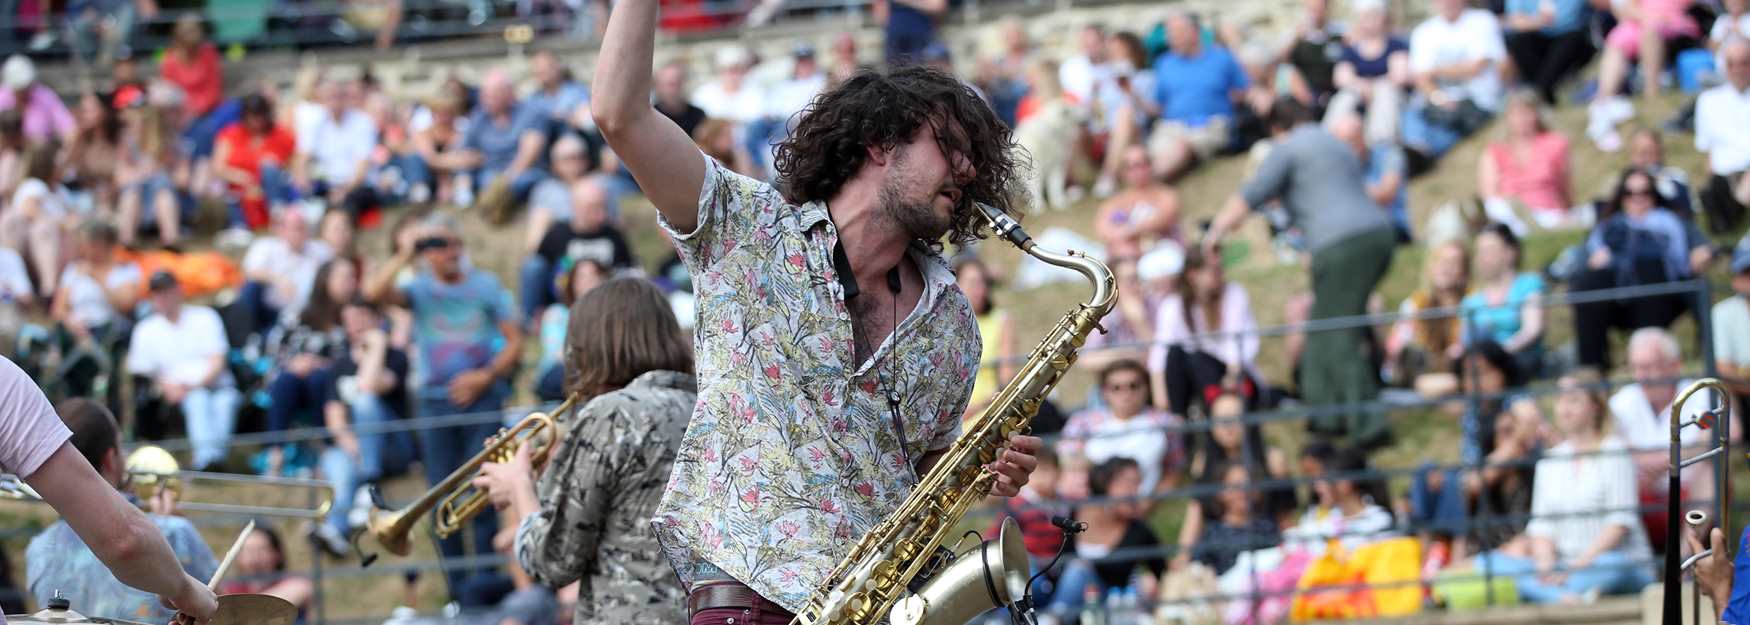 Man playing the saxophone to the crowd